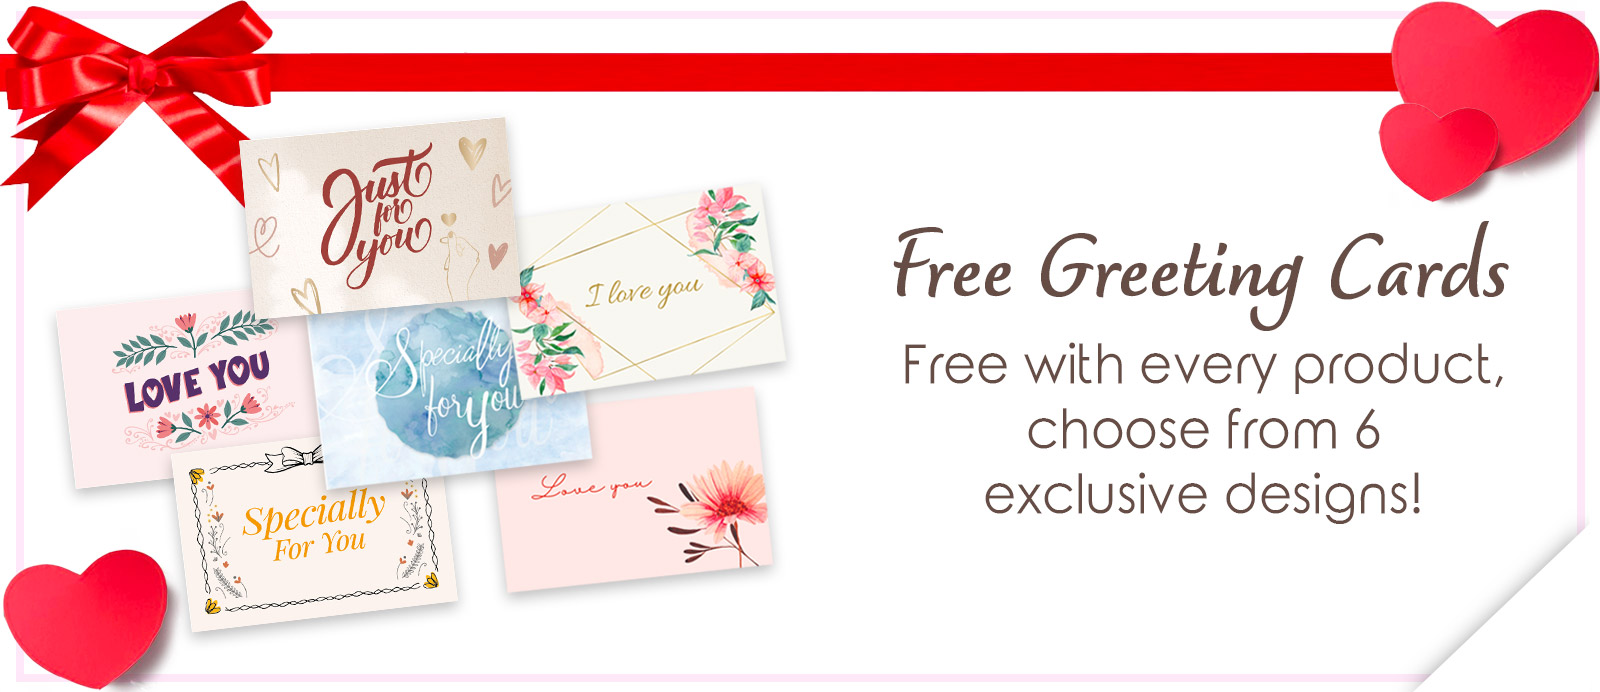 Free Valentine's Day Greeting Cards with every purchase!